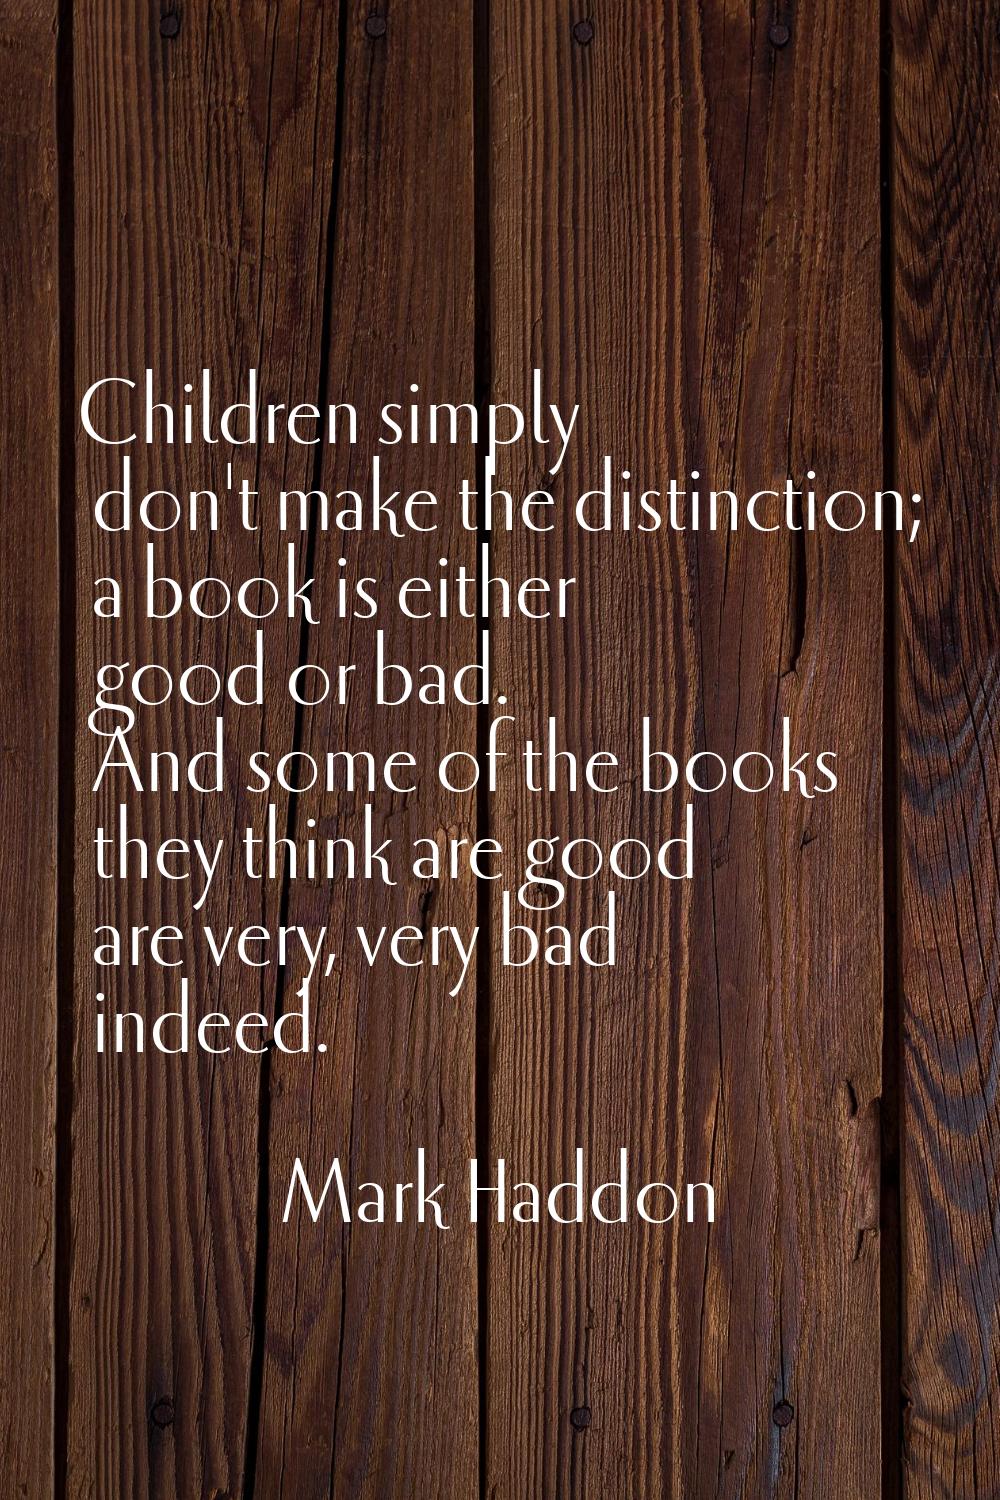 Children simply don't make the distinction; a book is either good or bad. And some of the books the